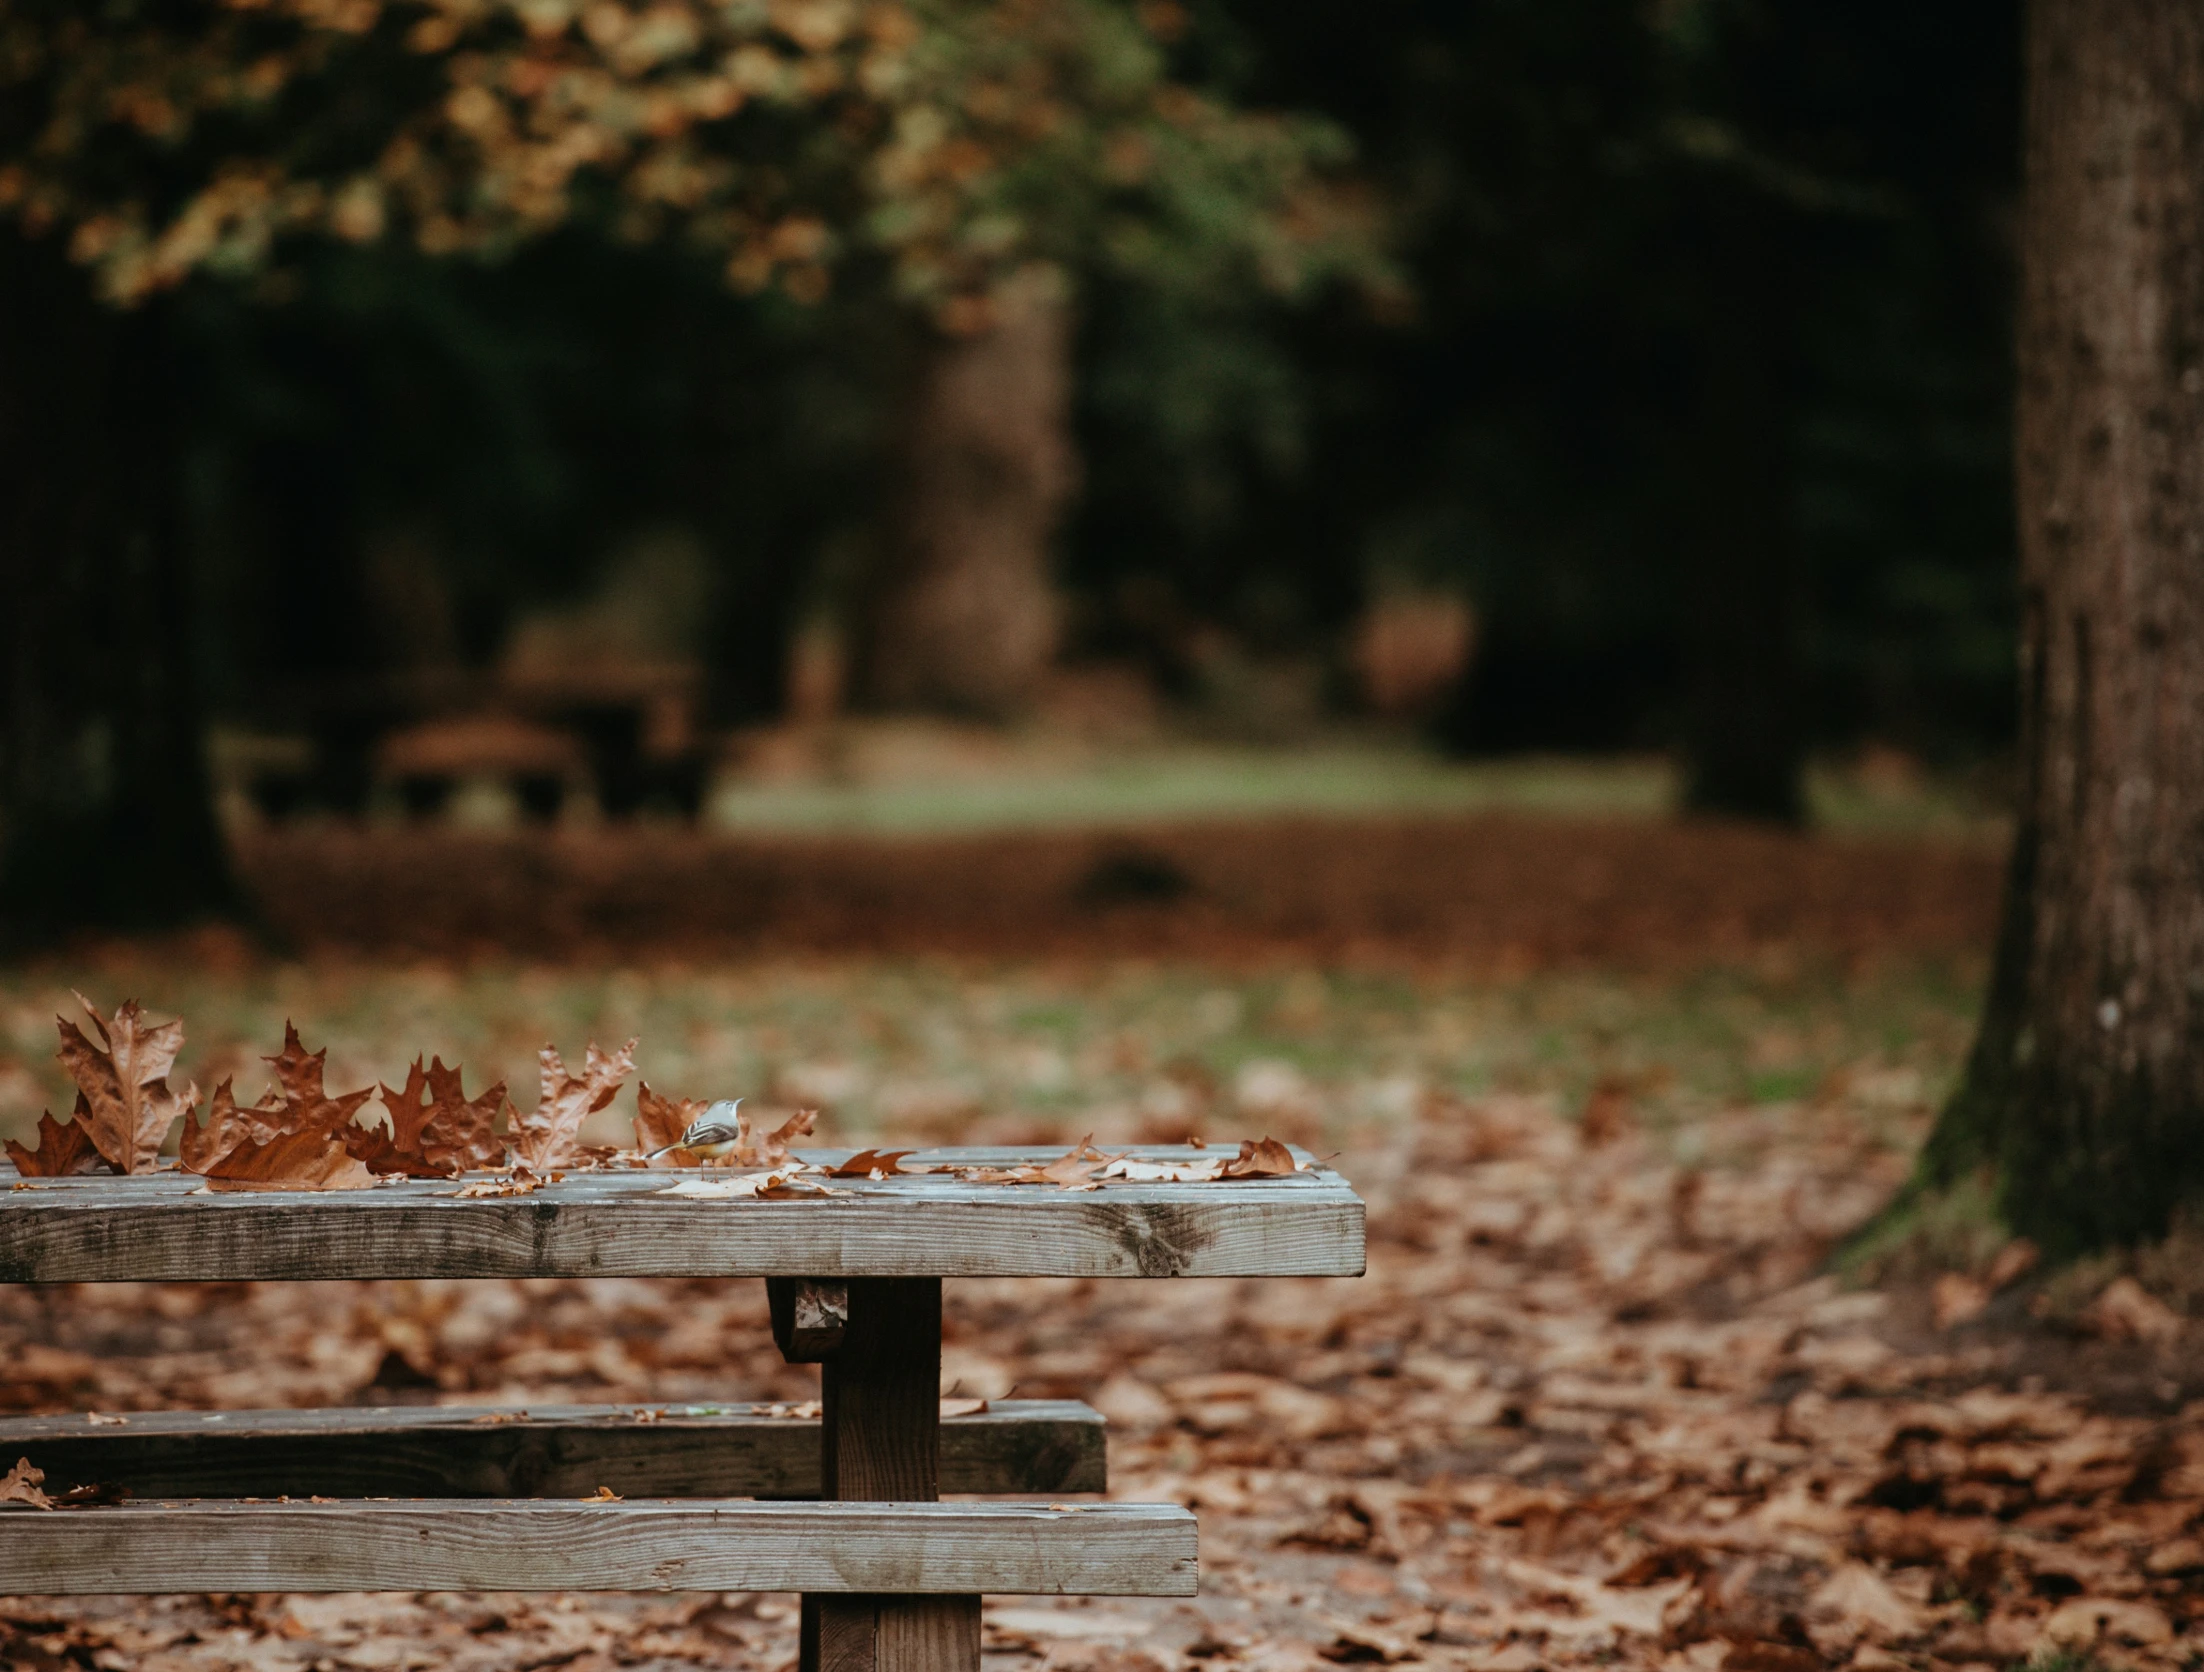 an old wooden bench with autumn leaves on the ground